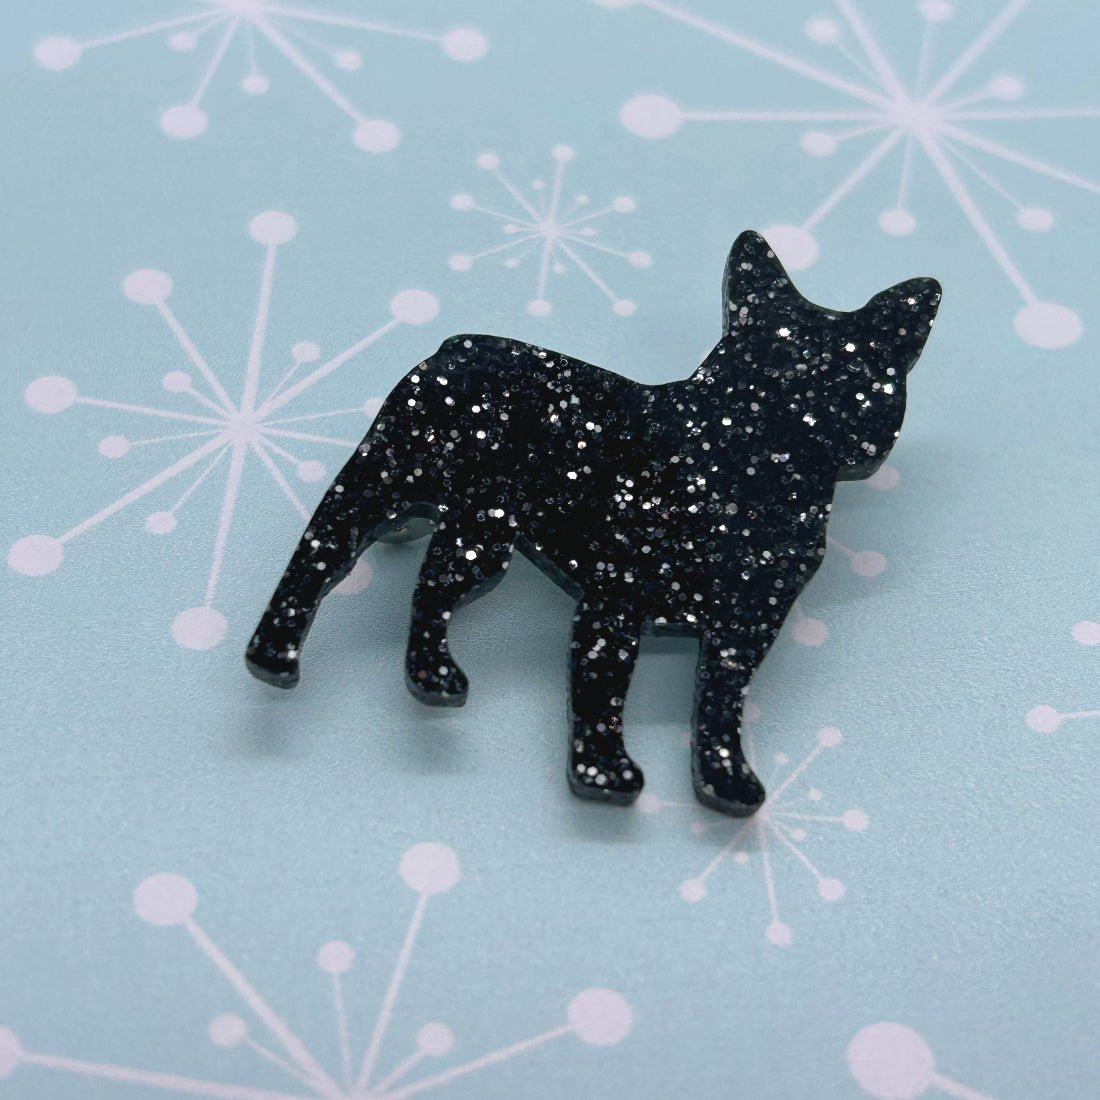 Acrylic French Bulldog brooch or necklace - The Argentum Design Co